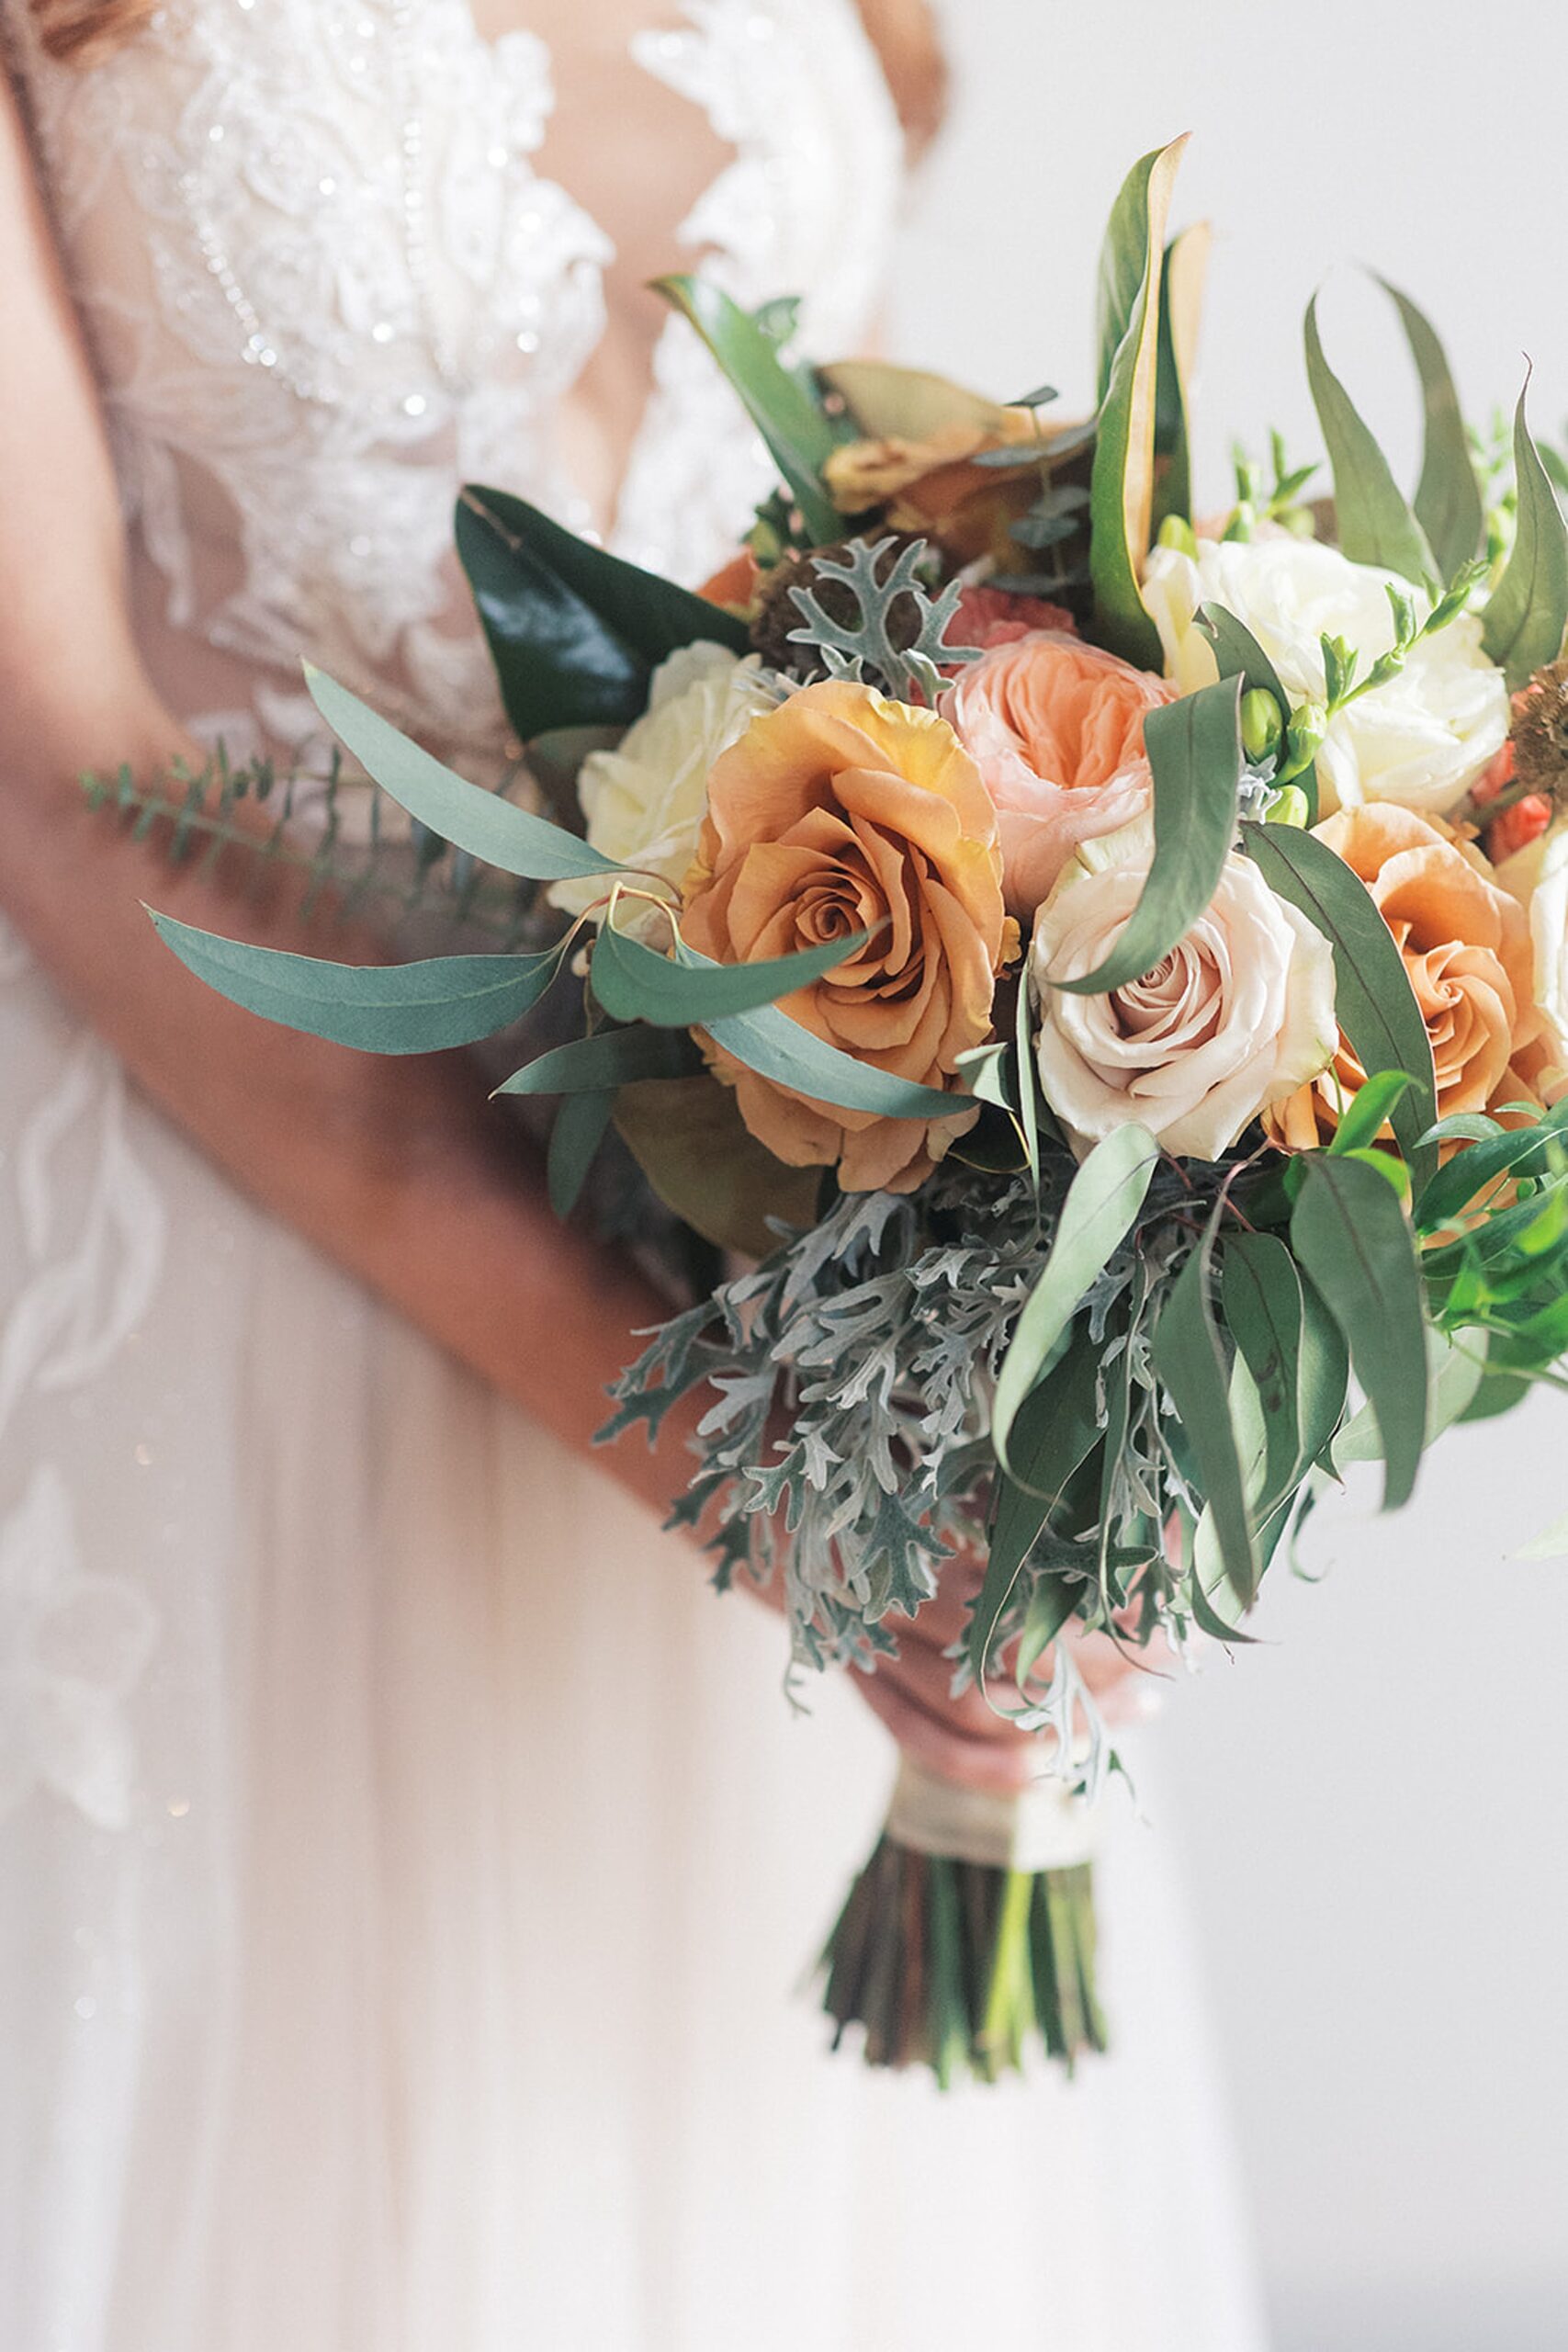 Details of a bride in a white lace dress holding her orange and white bouquet